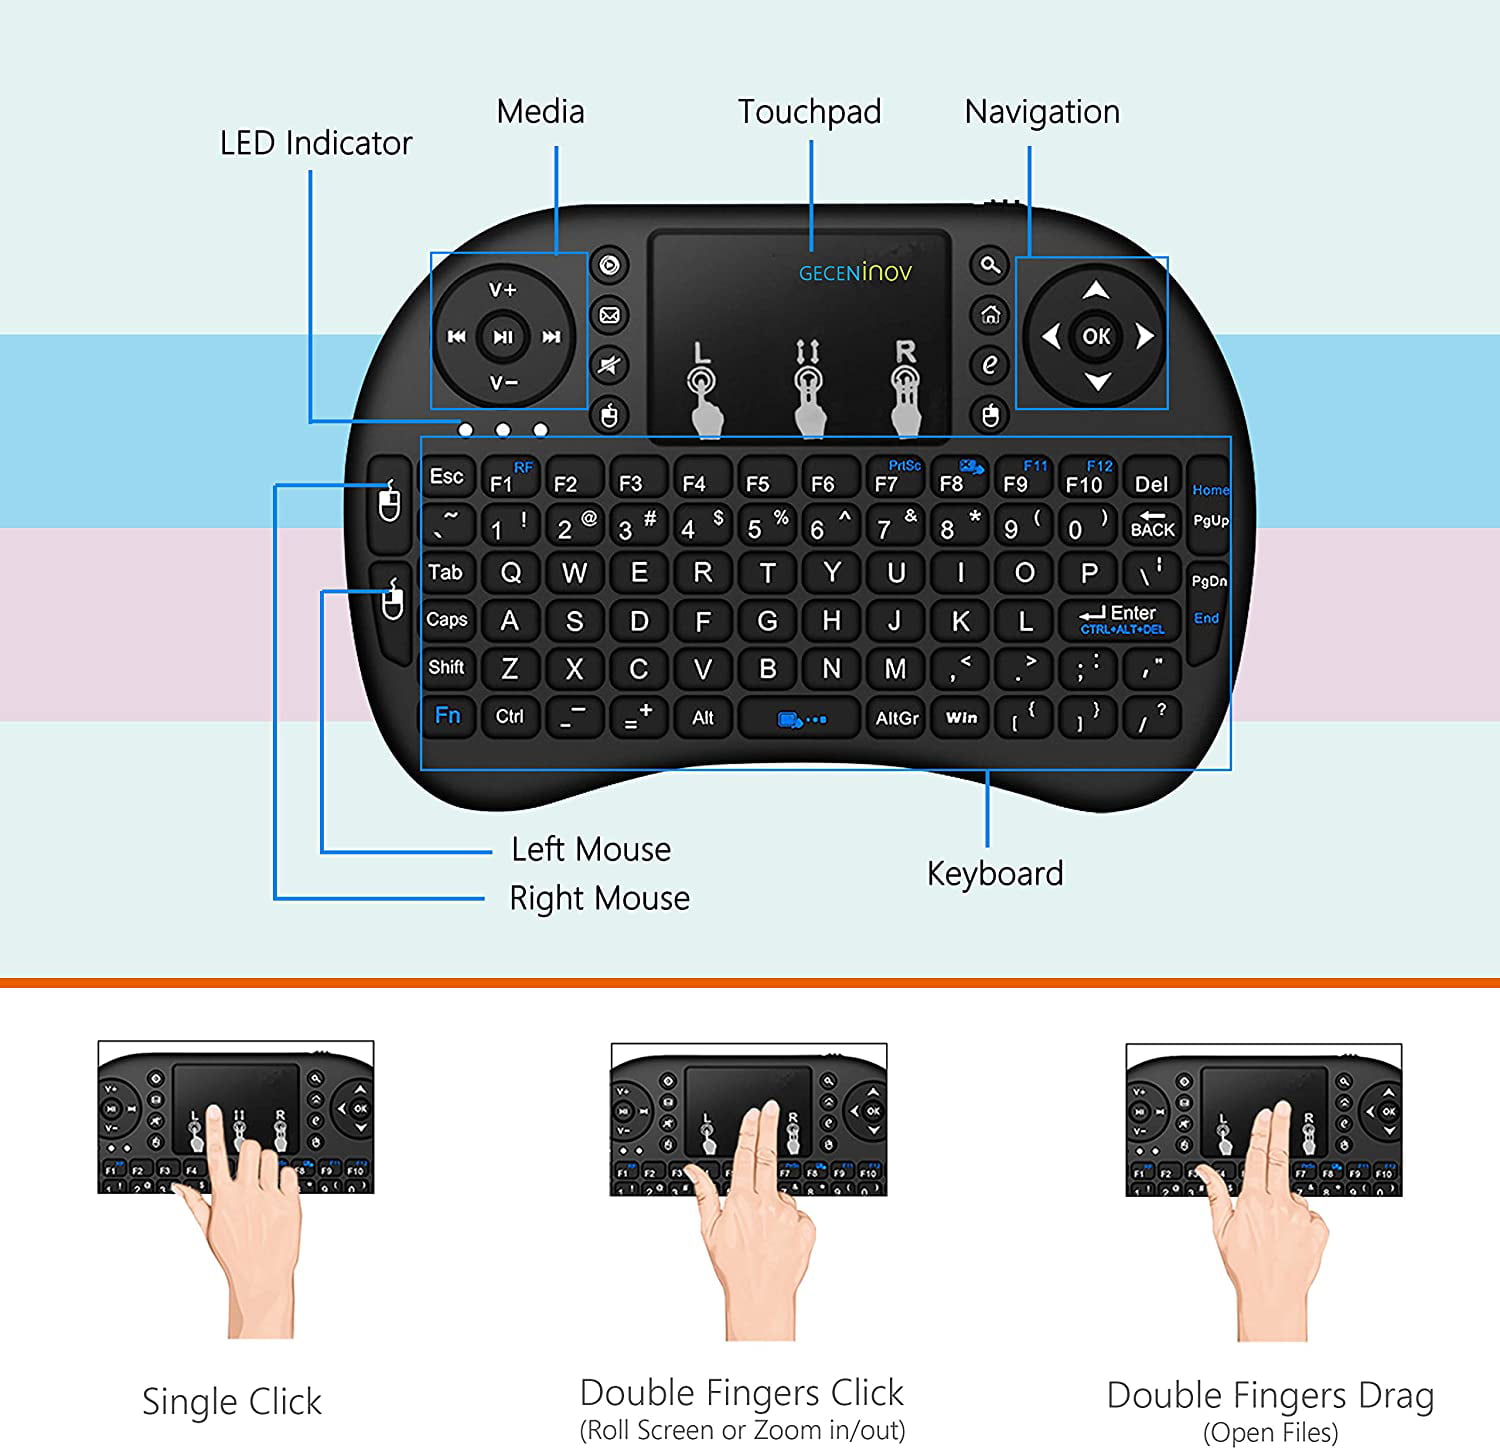 Calvas Russian English 2.4GHz Wireless Keyboard Touchpad Mouse Handheld Remote Control with Backlight for Android TV Box Smart TV